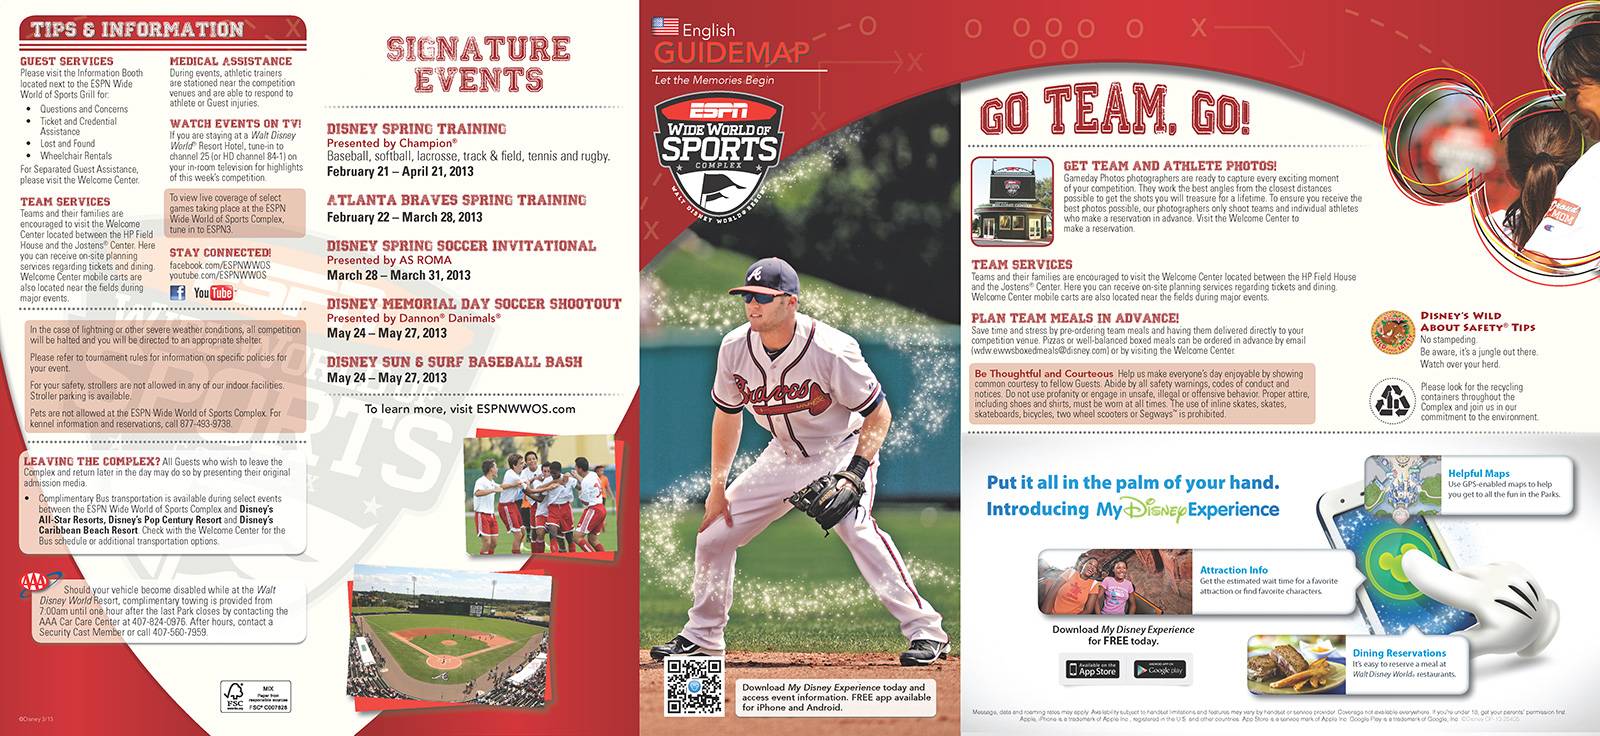 New 2013 ESPN World of Sports Guidemap Page 1